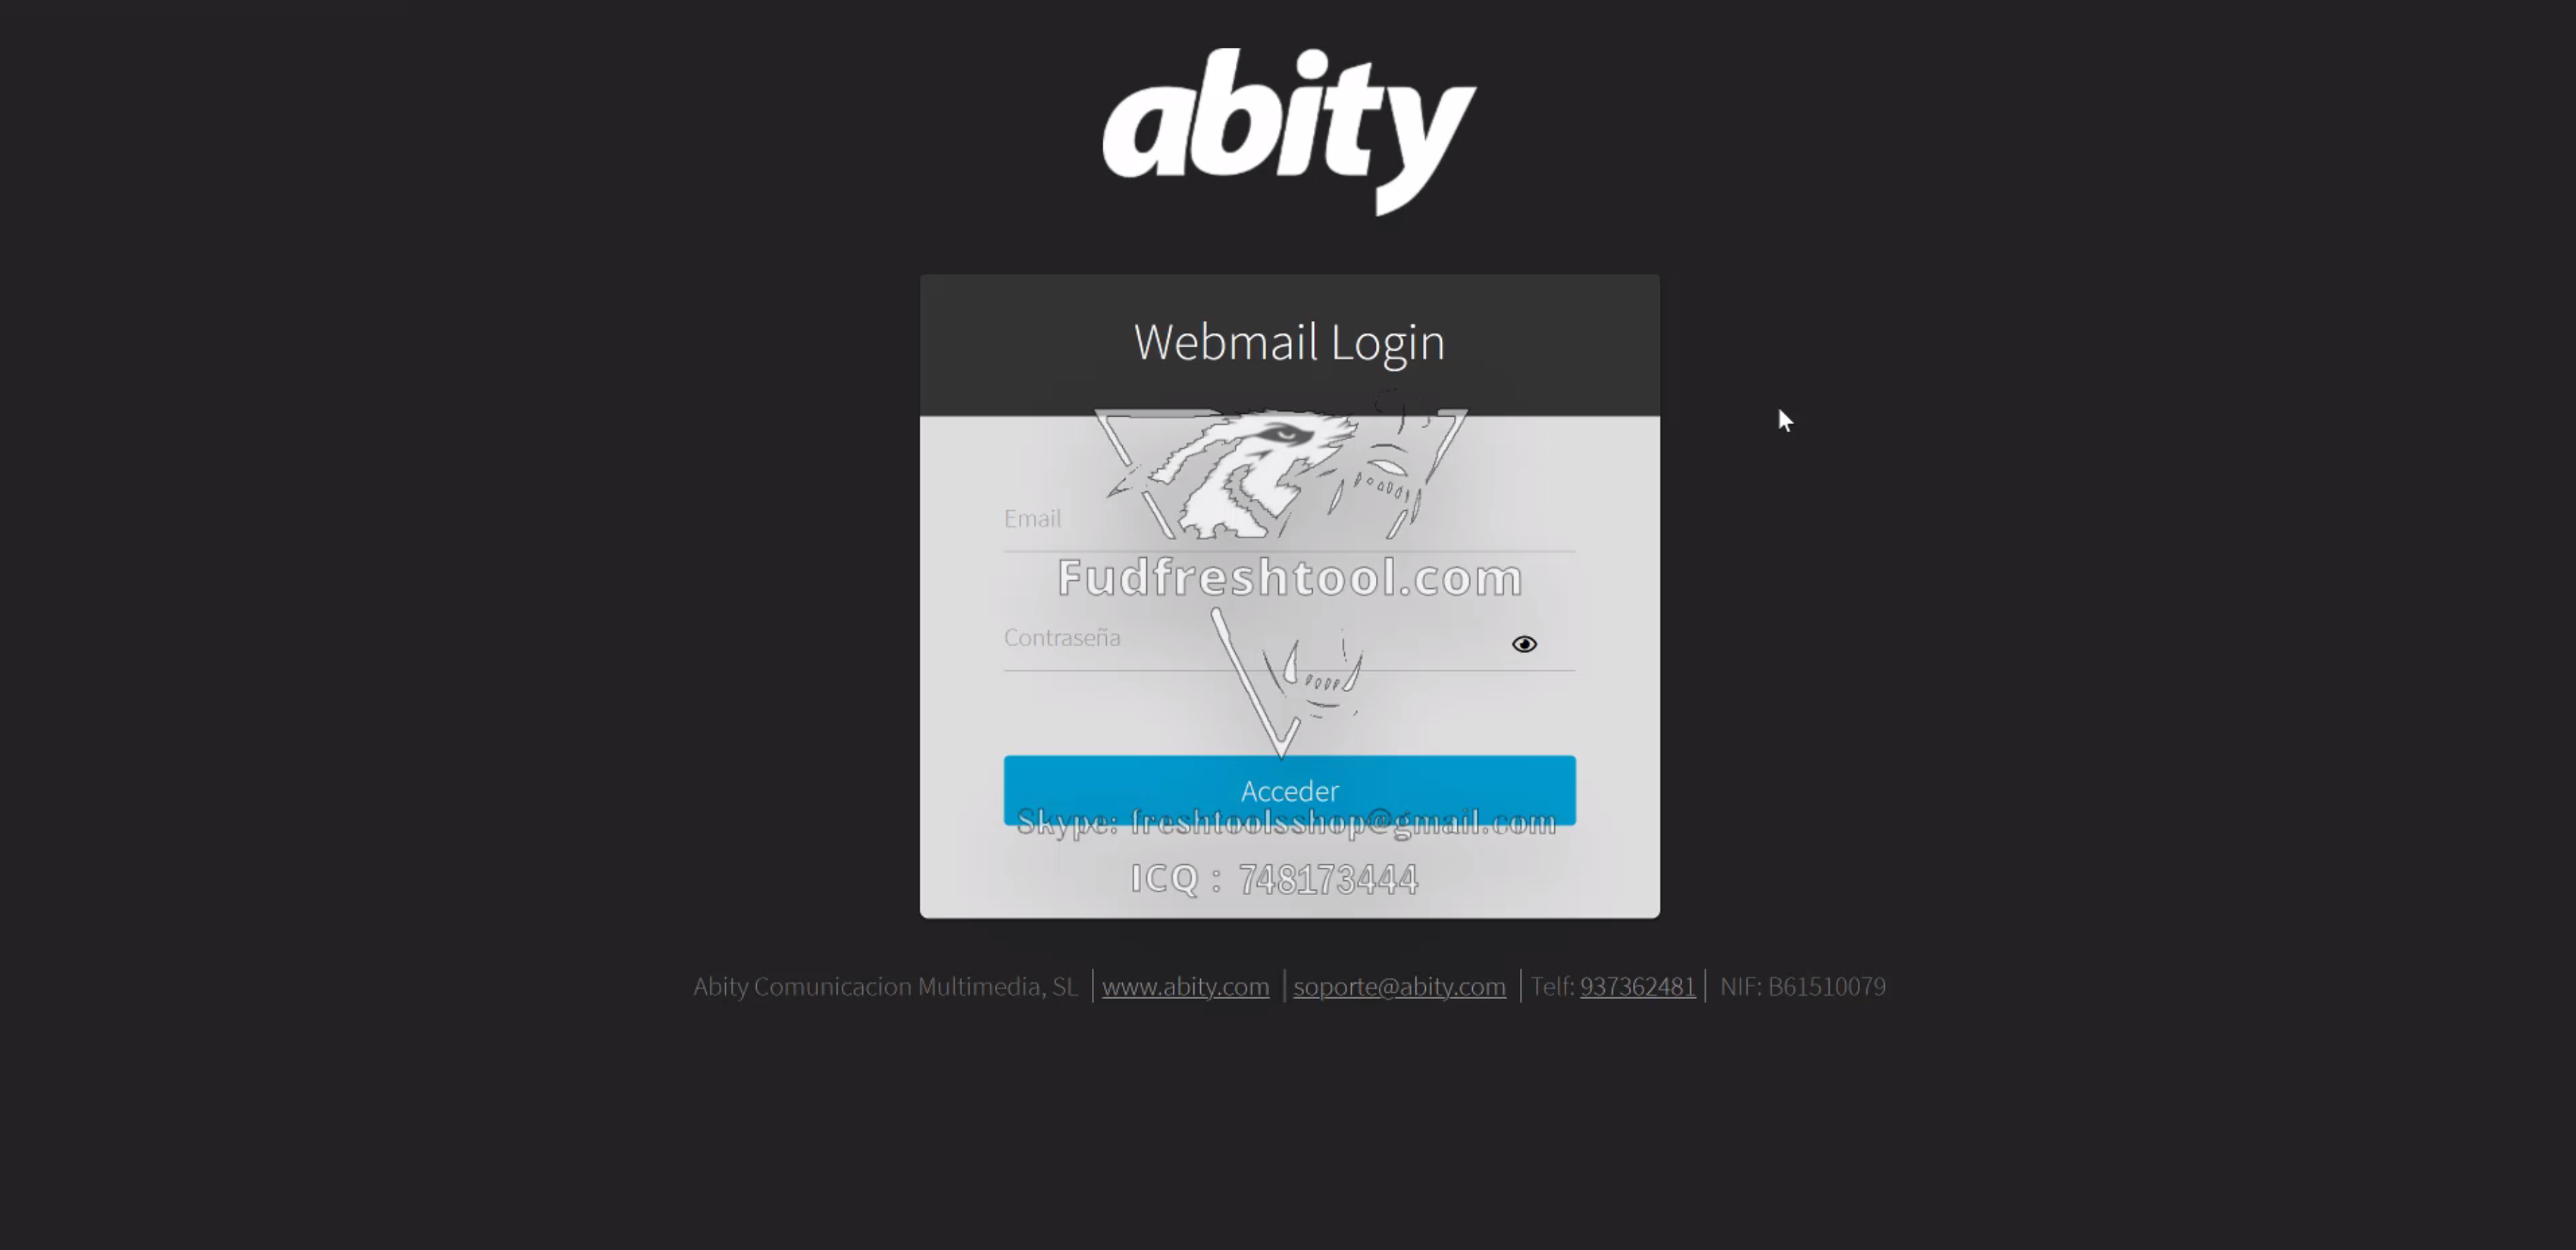 Abity Webmail Scam Page